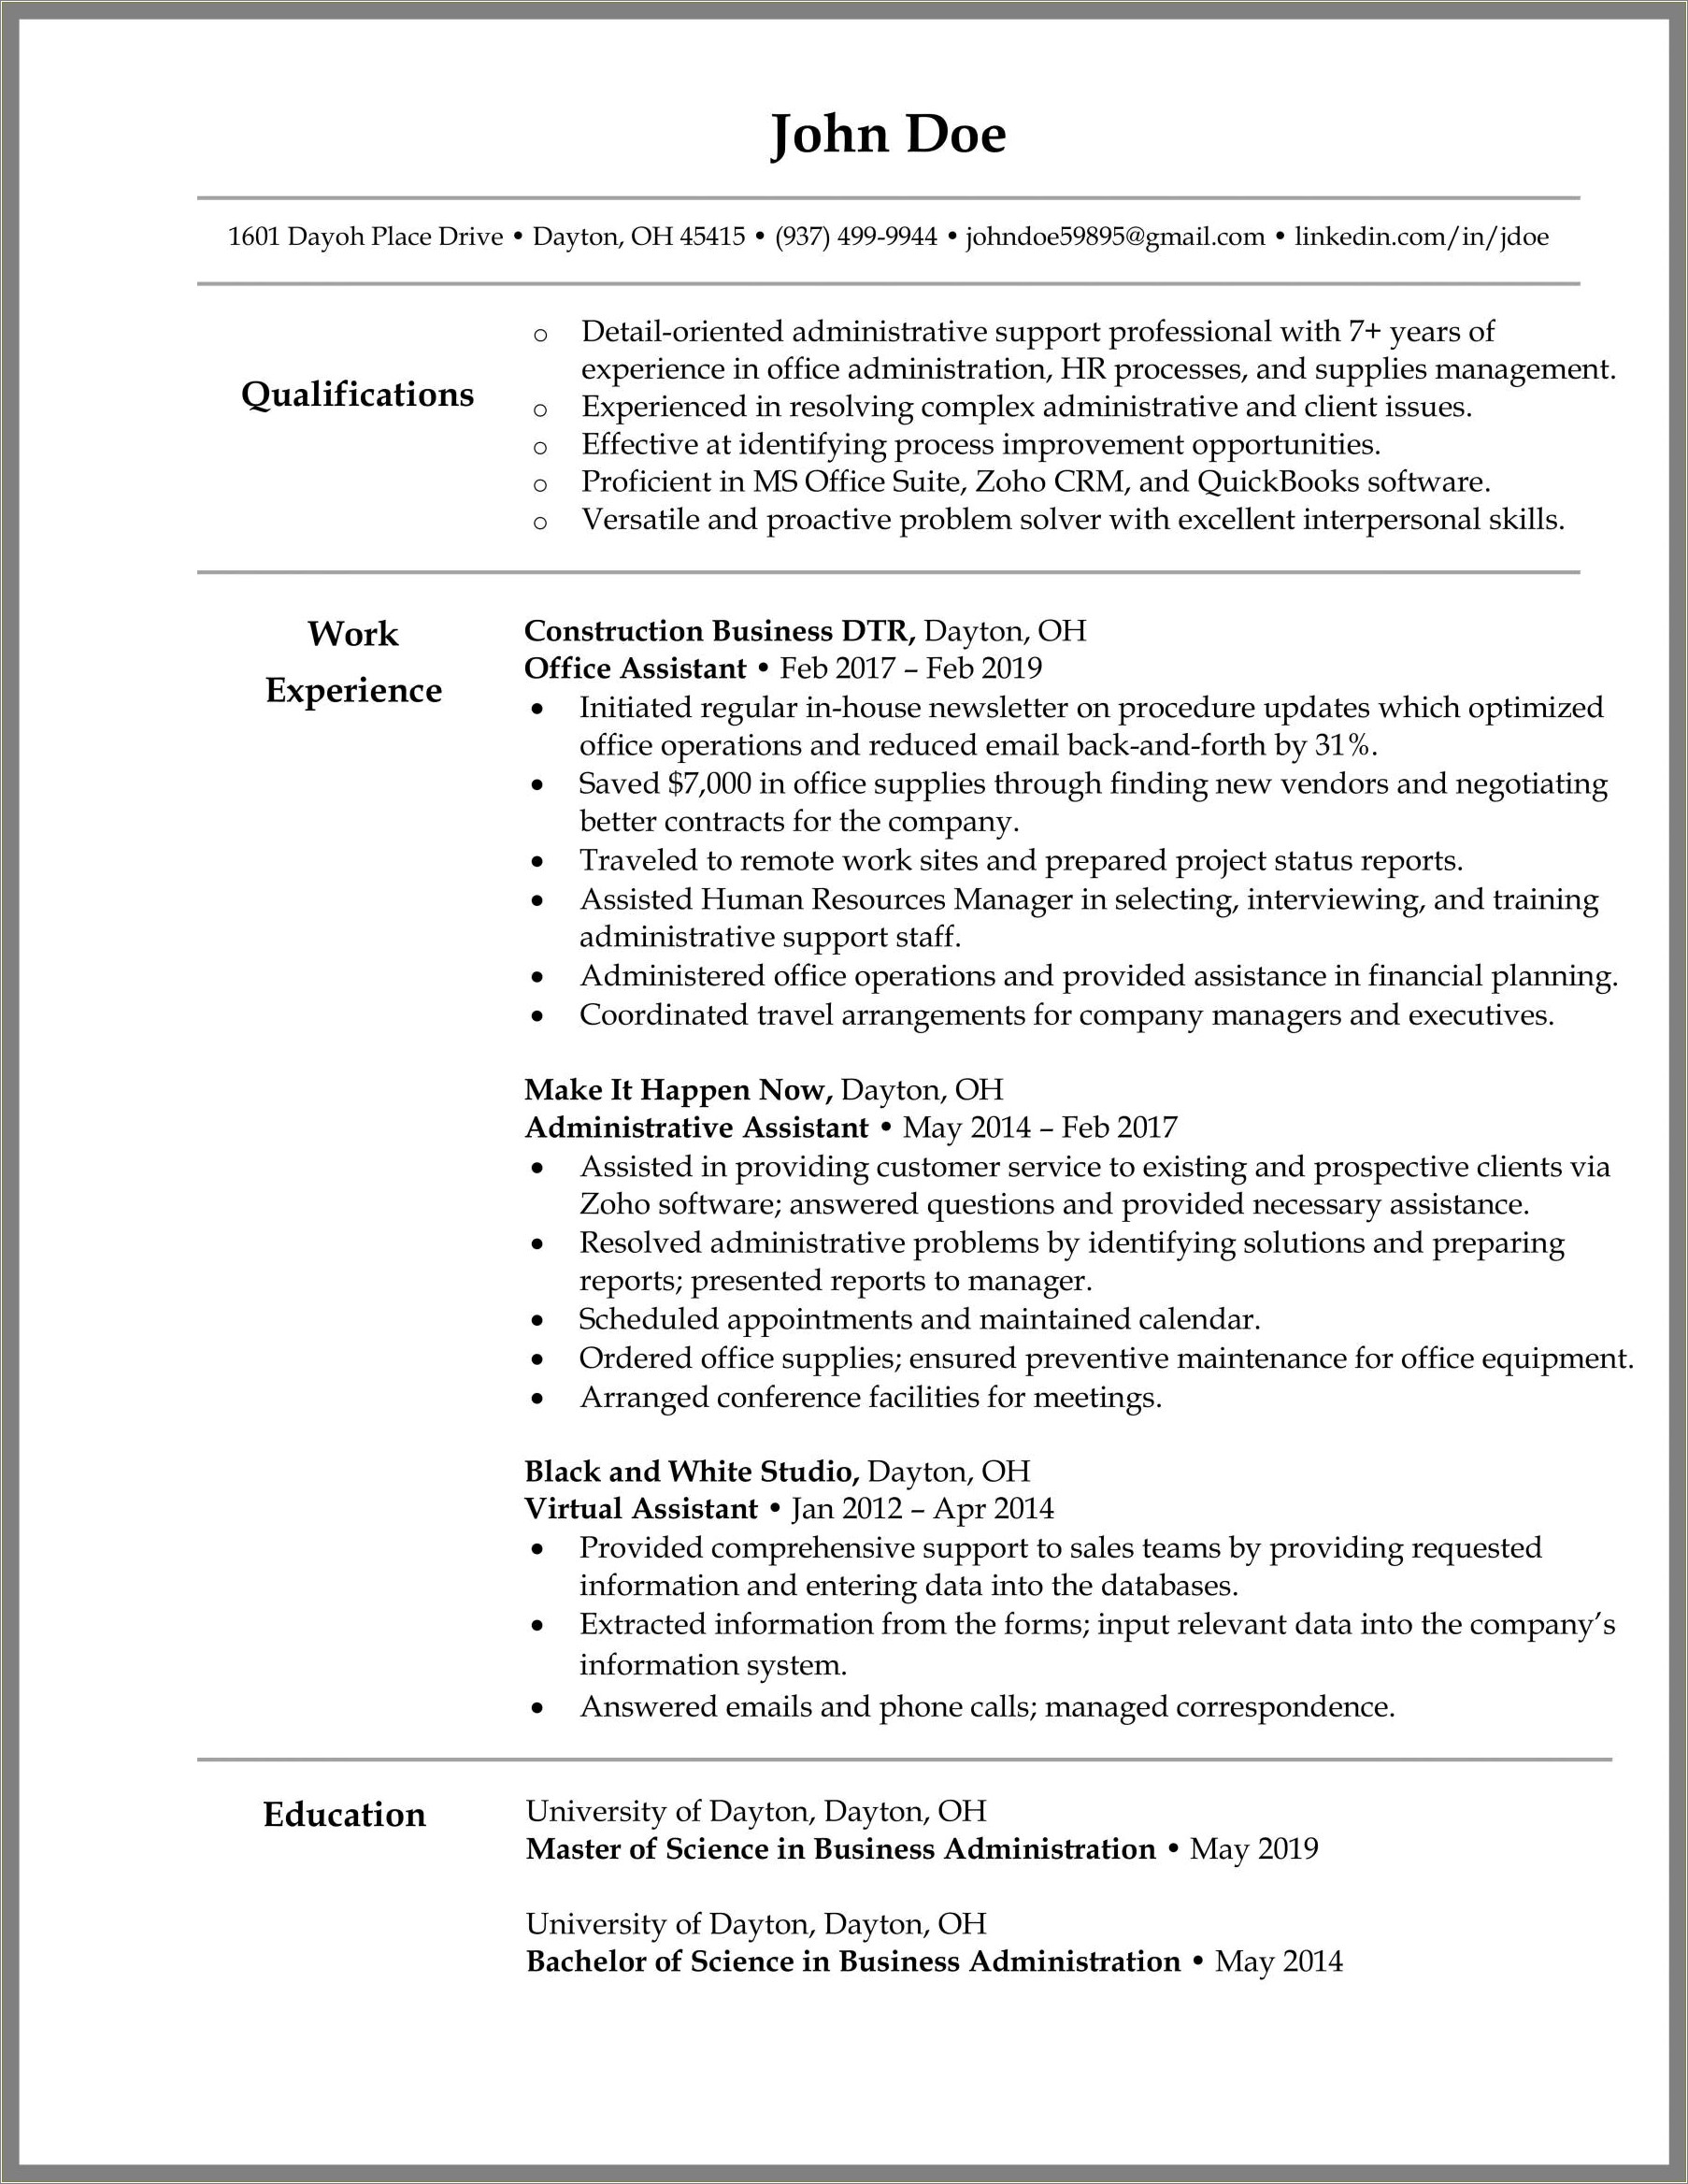 Resume Summary Of Qualifications Administrative Assistant